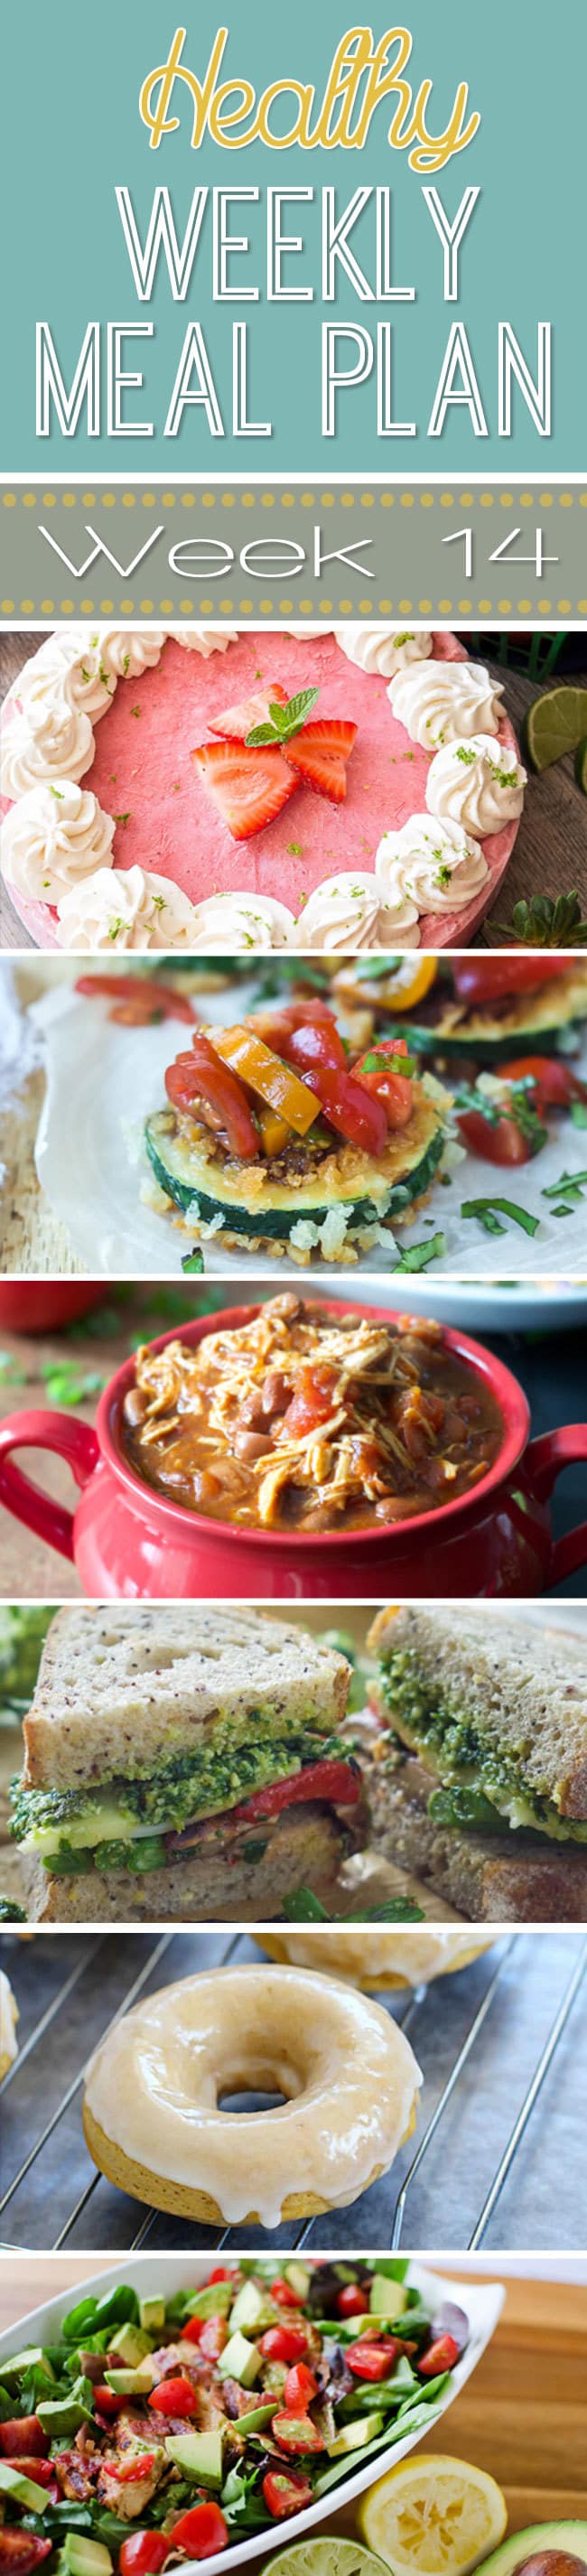 Healthy Meal Plan Week #14 - yummy breakfast, lunch, dinner, snack and dessert recipes for you to make this week!